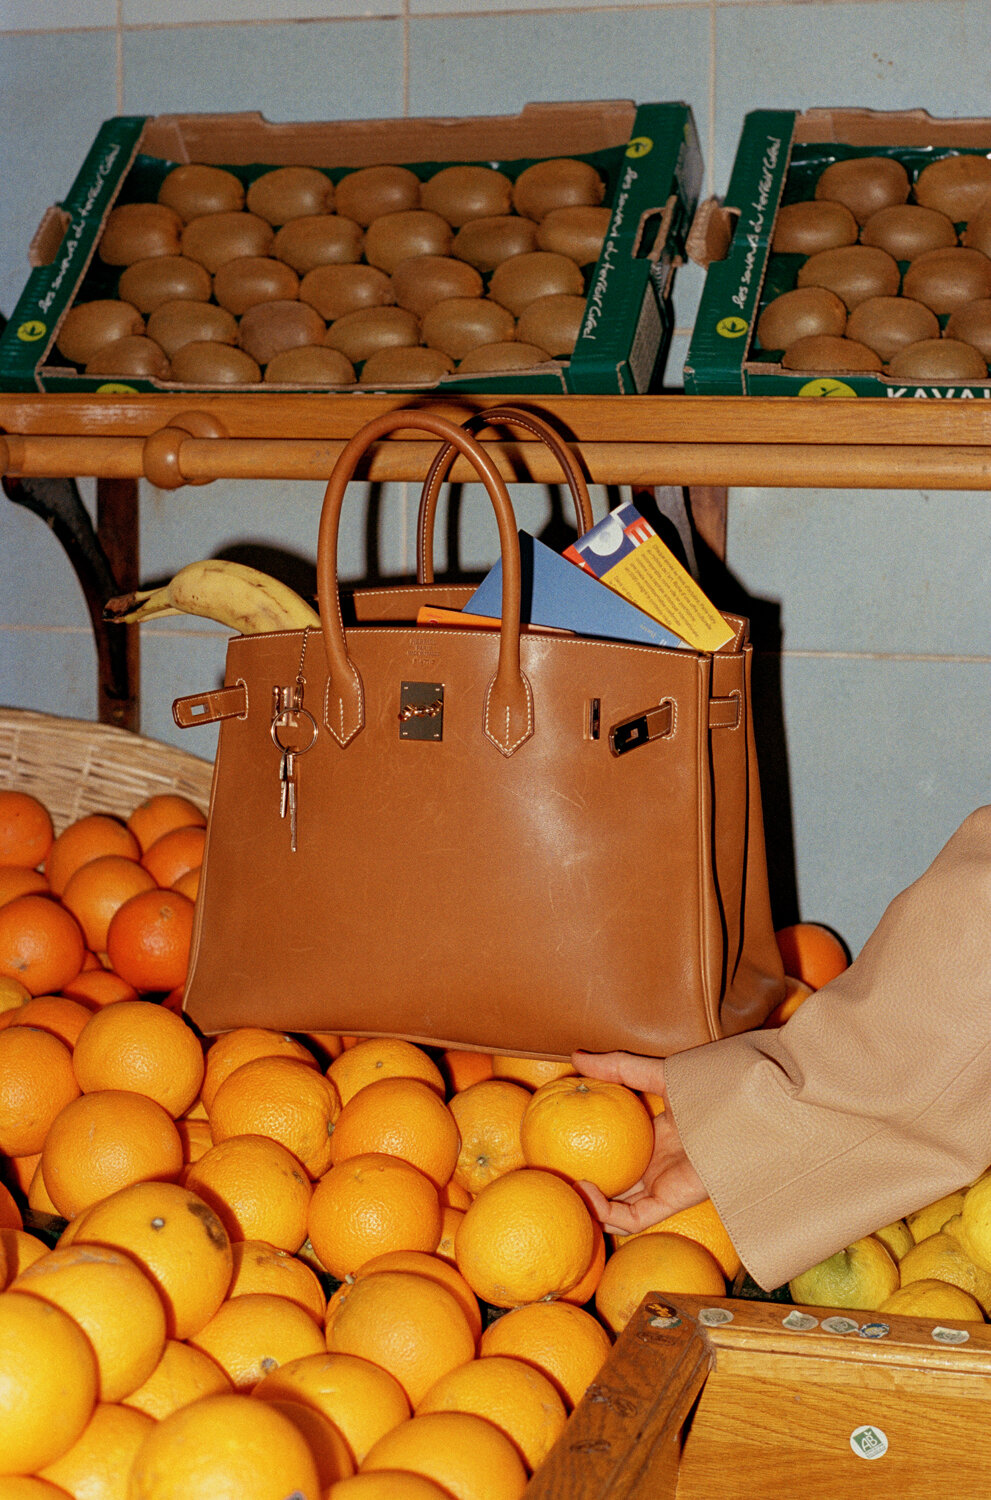 Image detail for -For the Big Day: The Most Expensive Hermes Birkin Bag